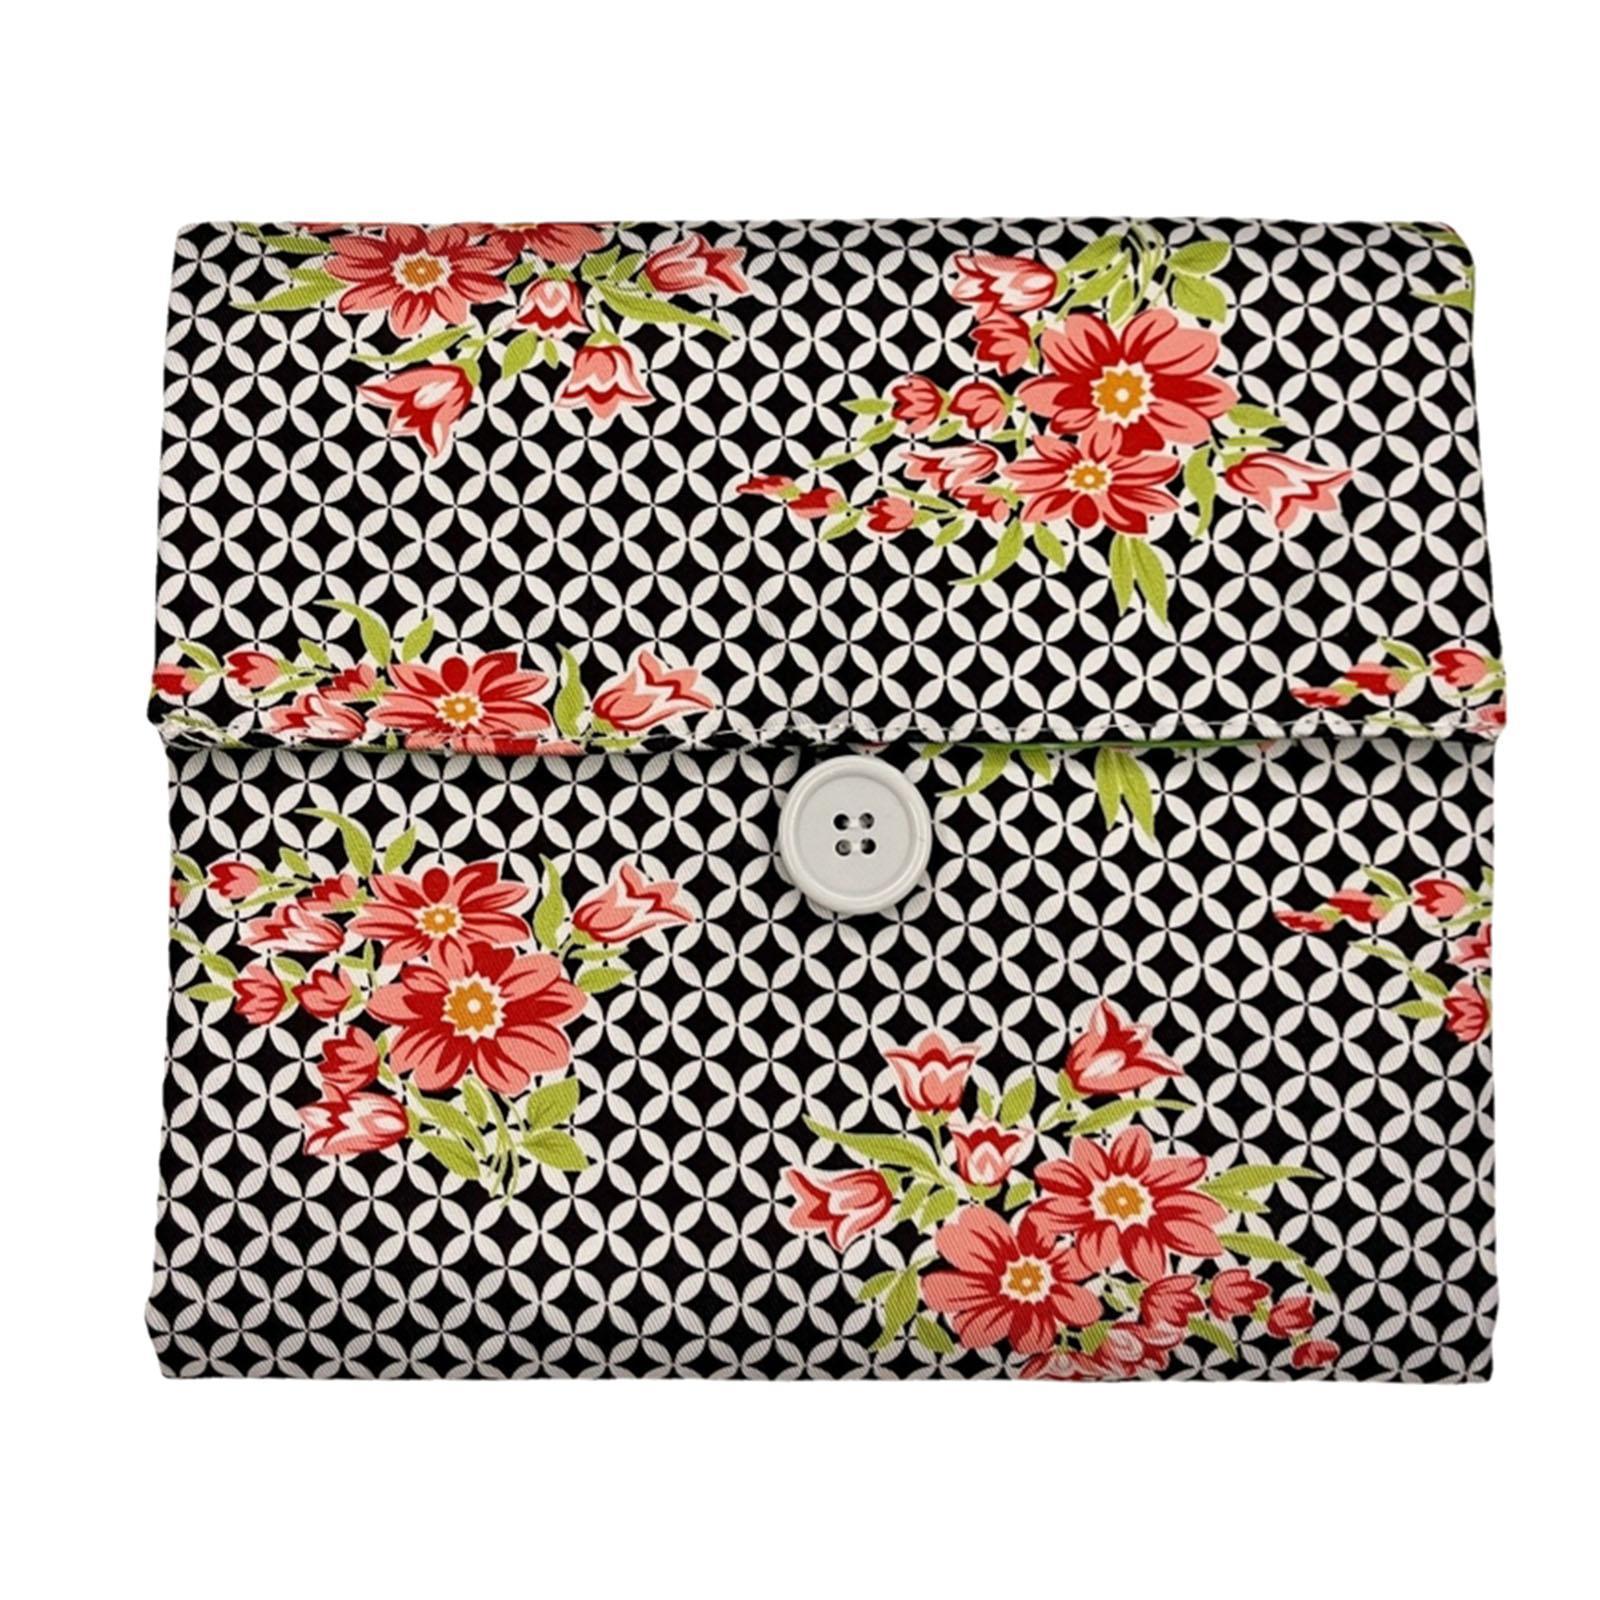 Cosmetic Bag fashion Toiletry Bag Unique Gift Makeup Case for Travel